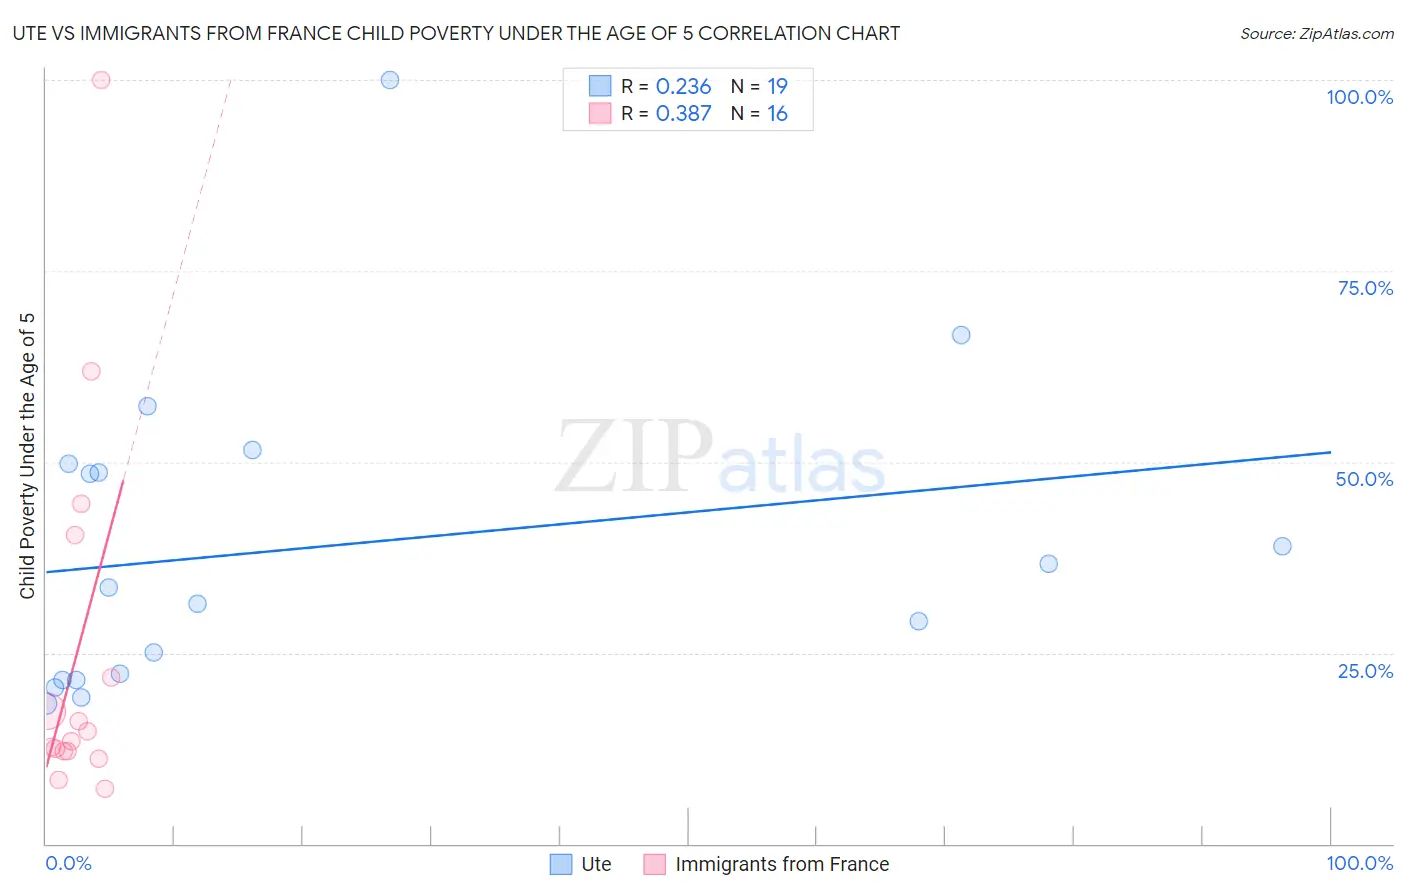 Ute vs Immigrants from France Child Poverty Under the Age of 5